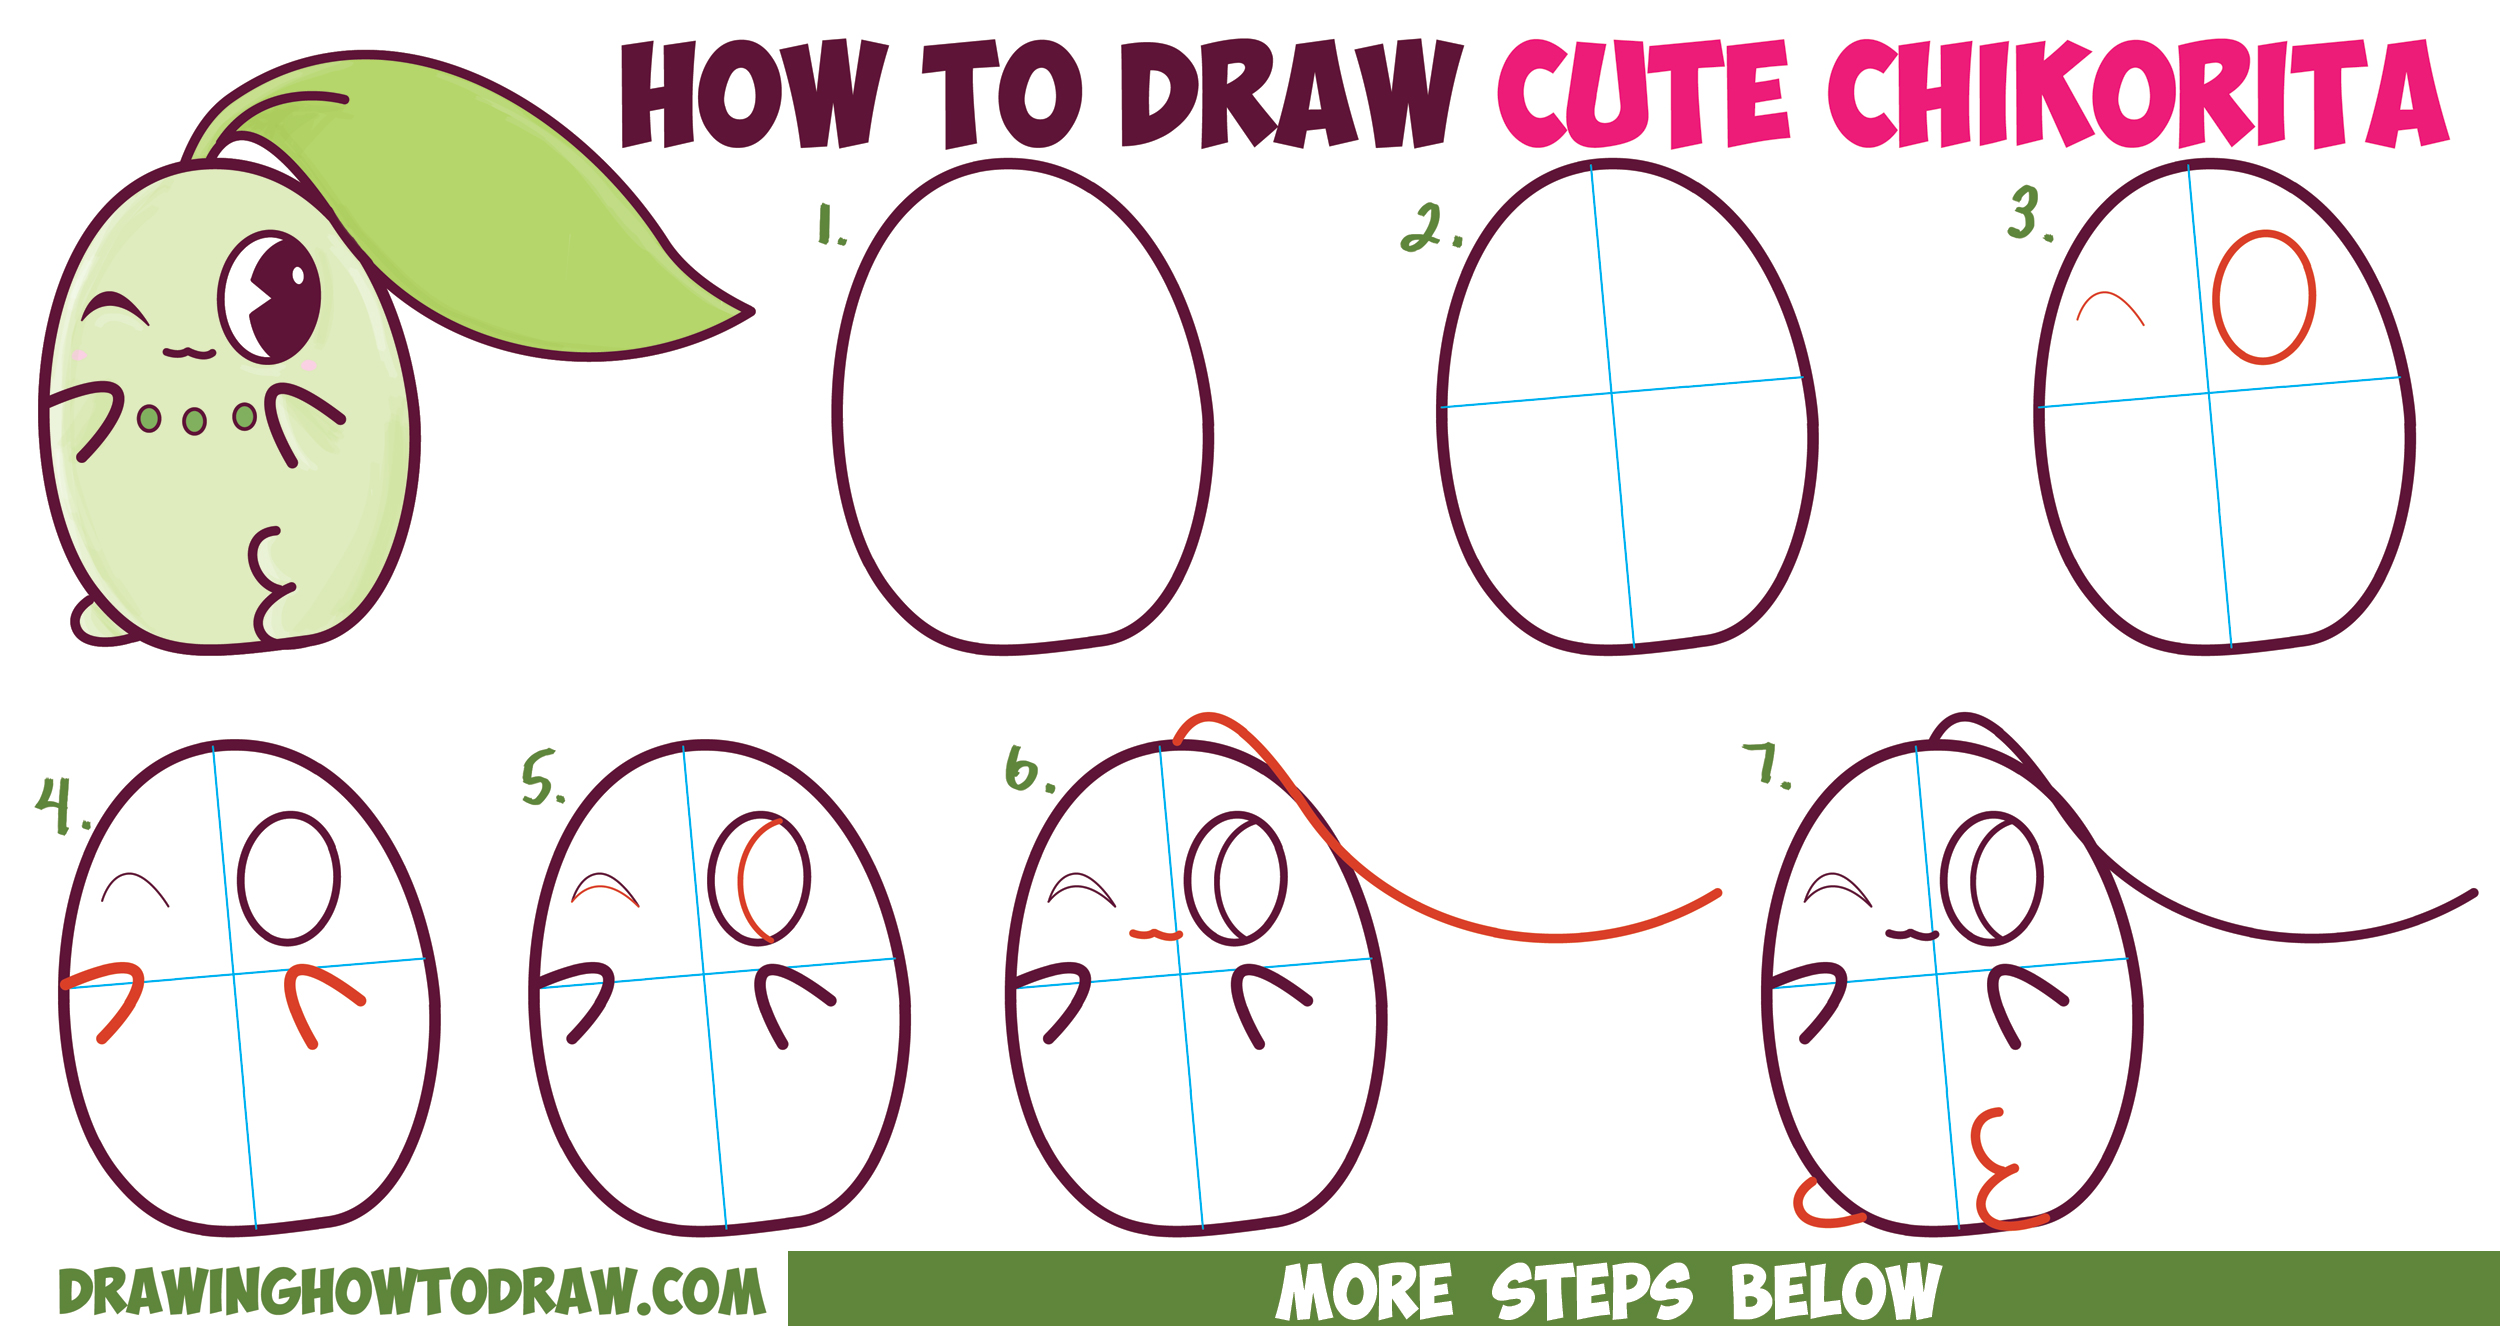 How to Draw Cute / Kawaii / Chibi Chikorita from Pokemon in Easy Step by Step Drawing Tutorial for Beginners